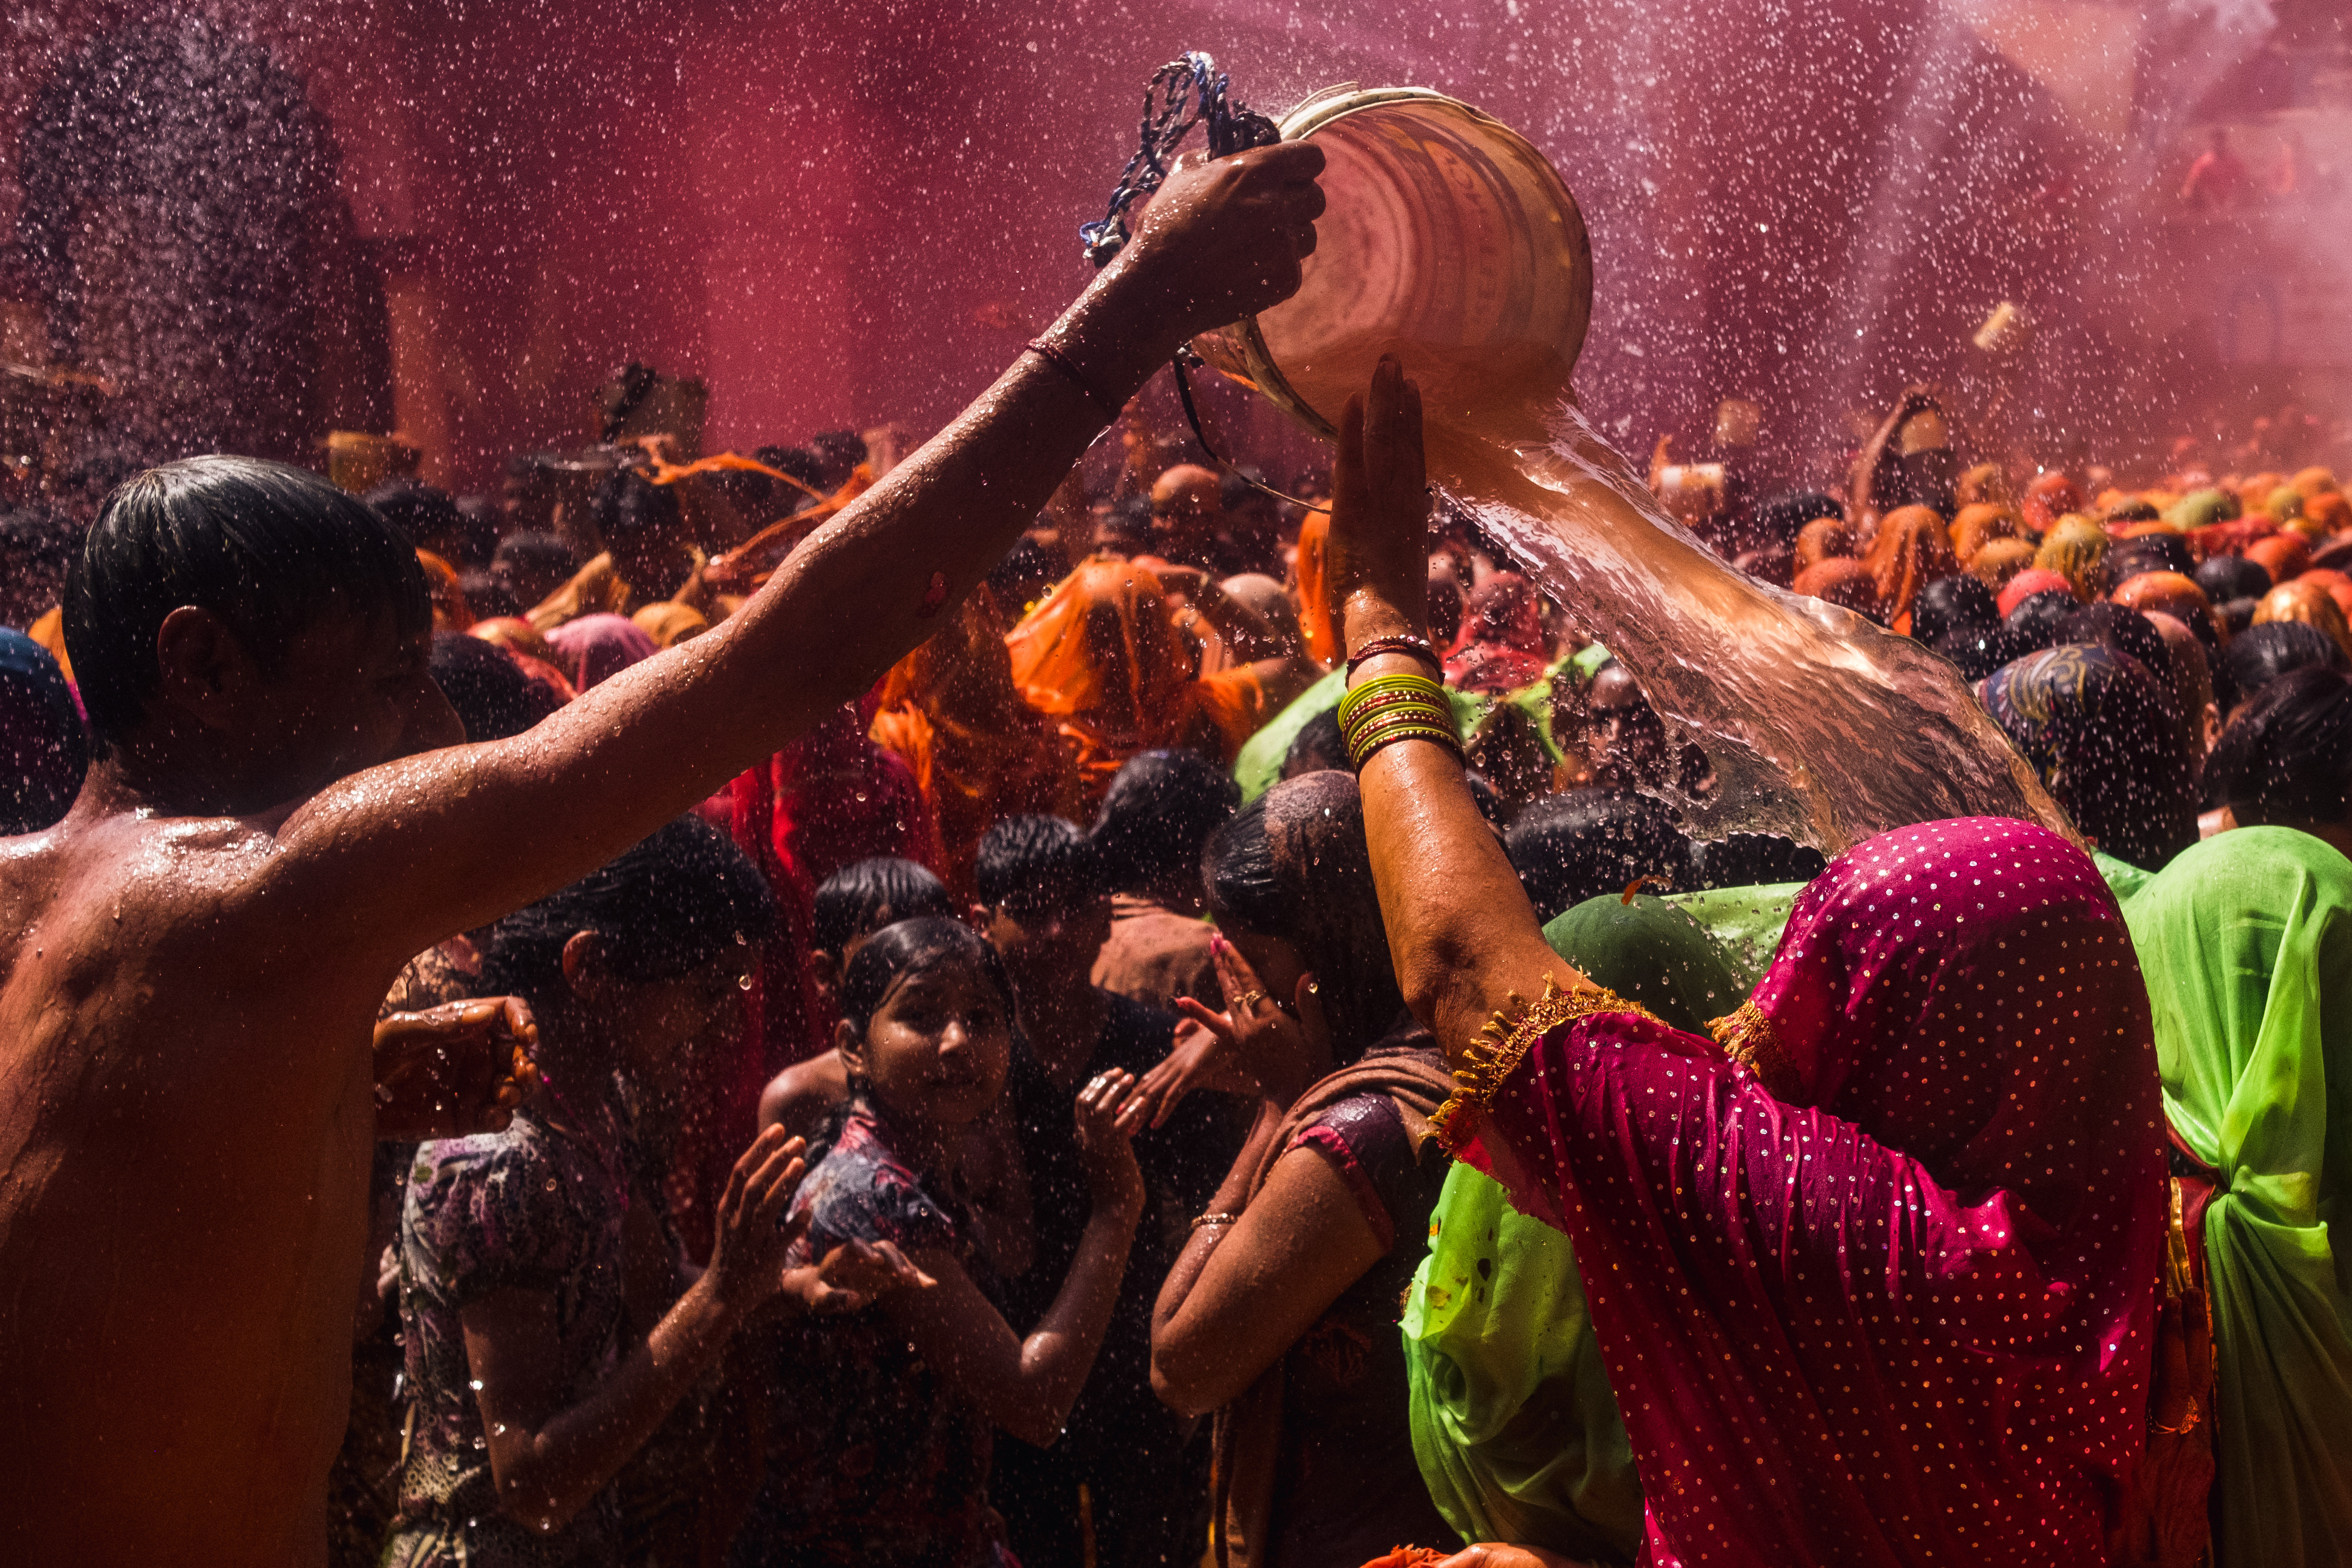 India Street Photography During Holi Festival. man throws bucket of water on lady as she tries to stop the water. Images by Jason Vinson